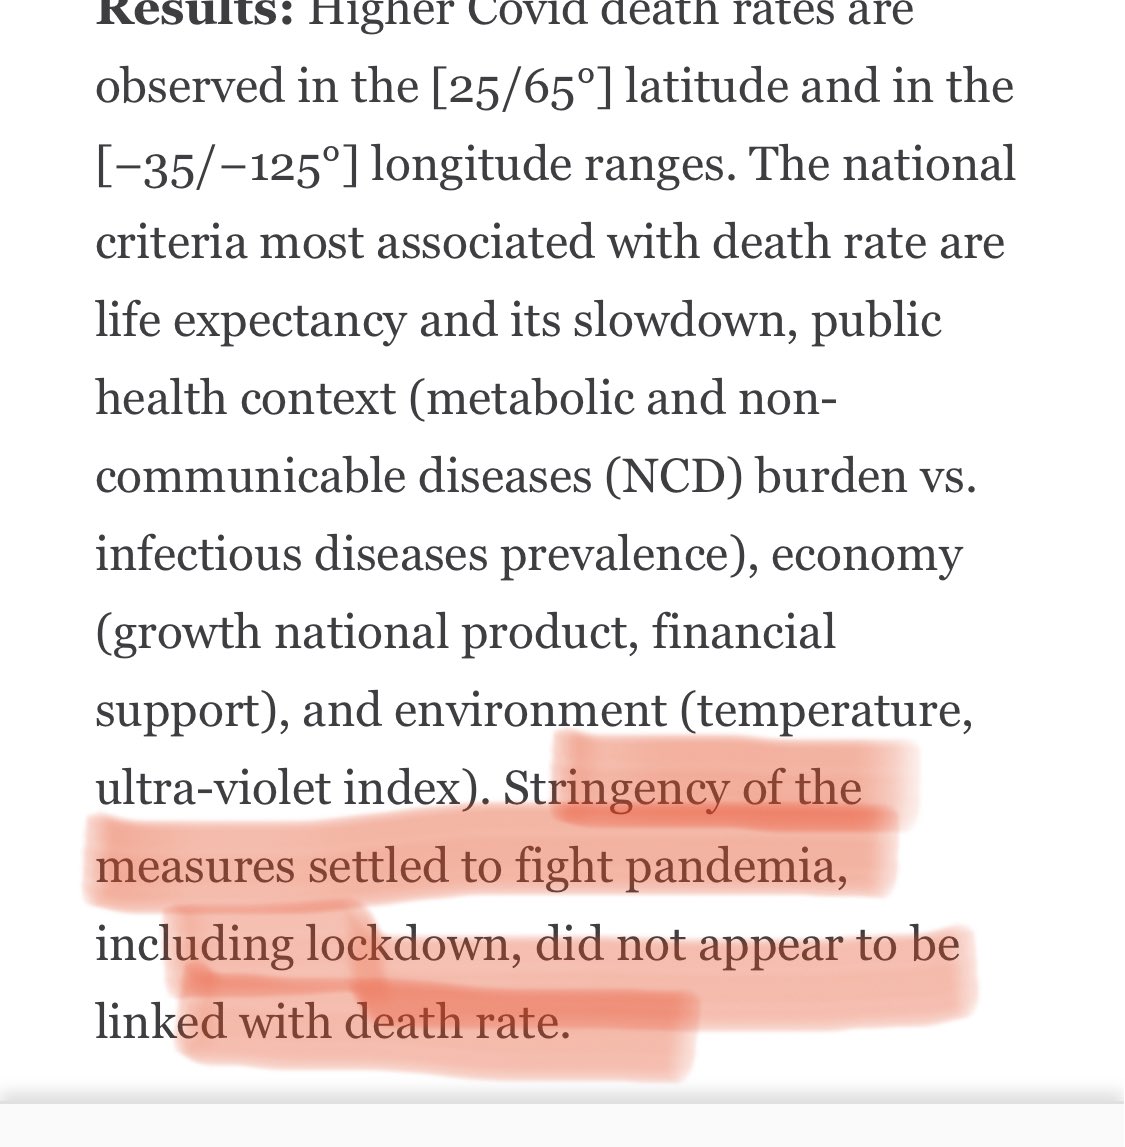 First, this study shows death rates were influenced by factors like geography and elderly population (life expectancy) but NOT by stringency of Gov imposed measures  https://www.frontiersin.org/articles/10.3389/fpubh.2020.604339/full